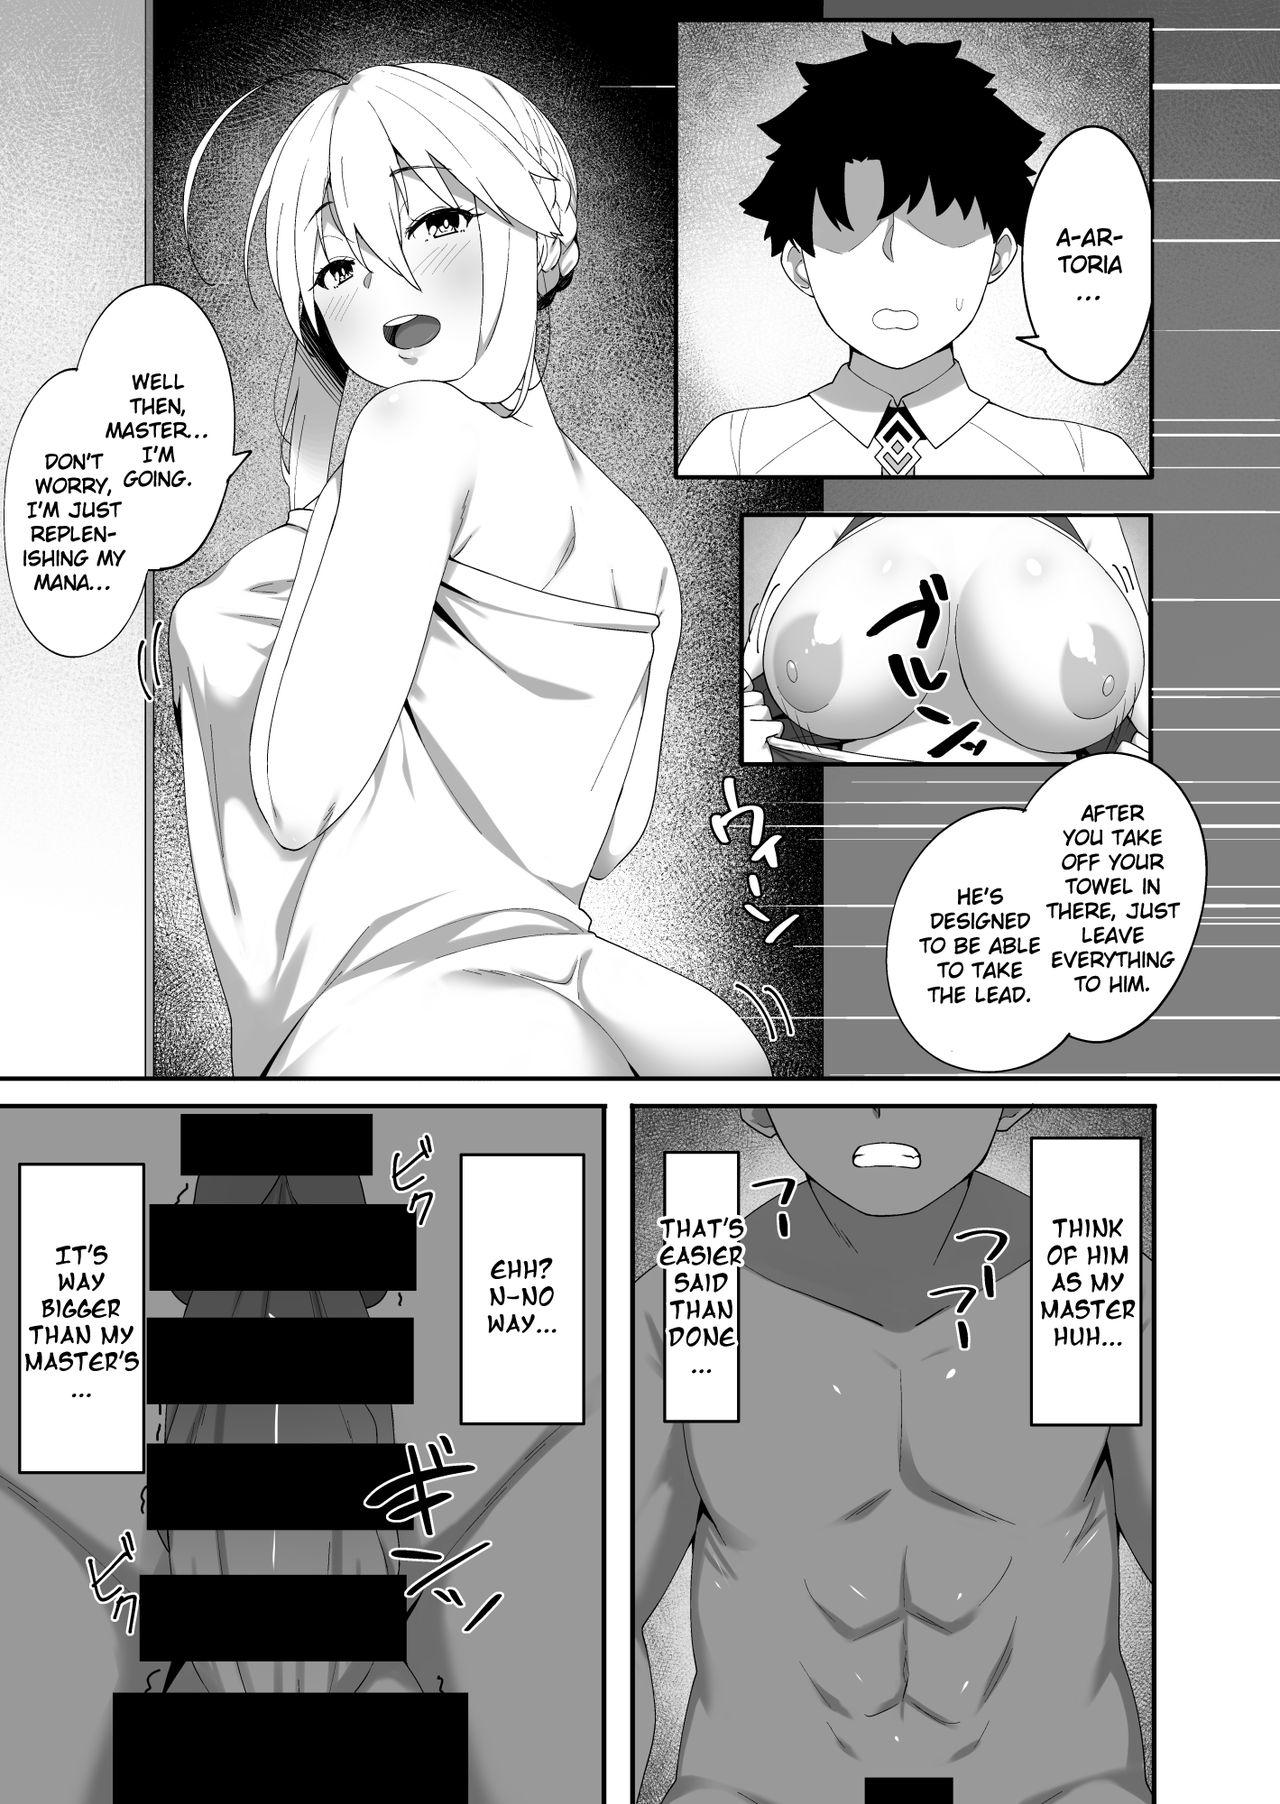 Movie Kabe no Mukou de Kimi ga Naku 2 | Crying Out From The Other Side Of The Wall 2 - Fate grand order Brazilian - Page 4